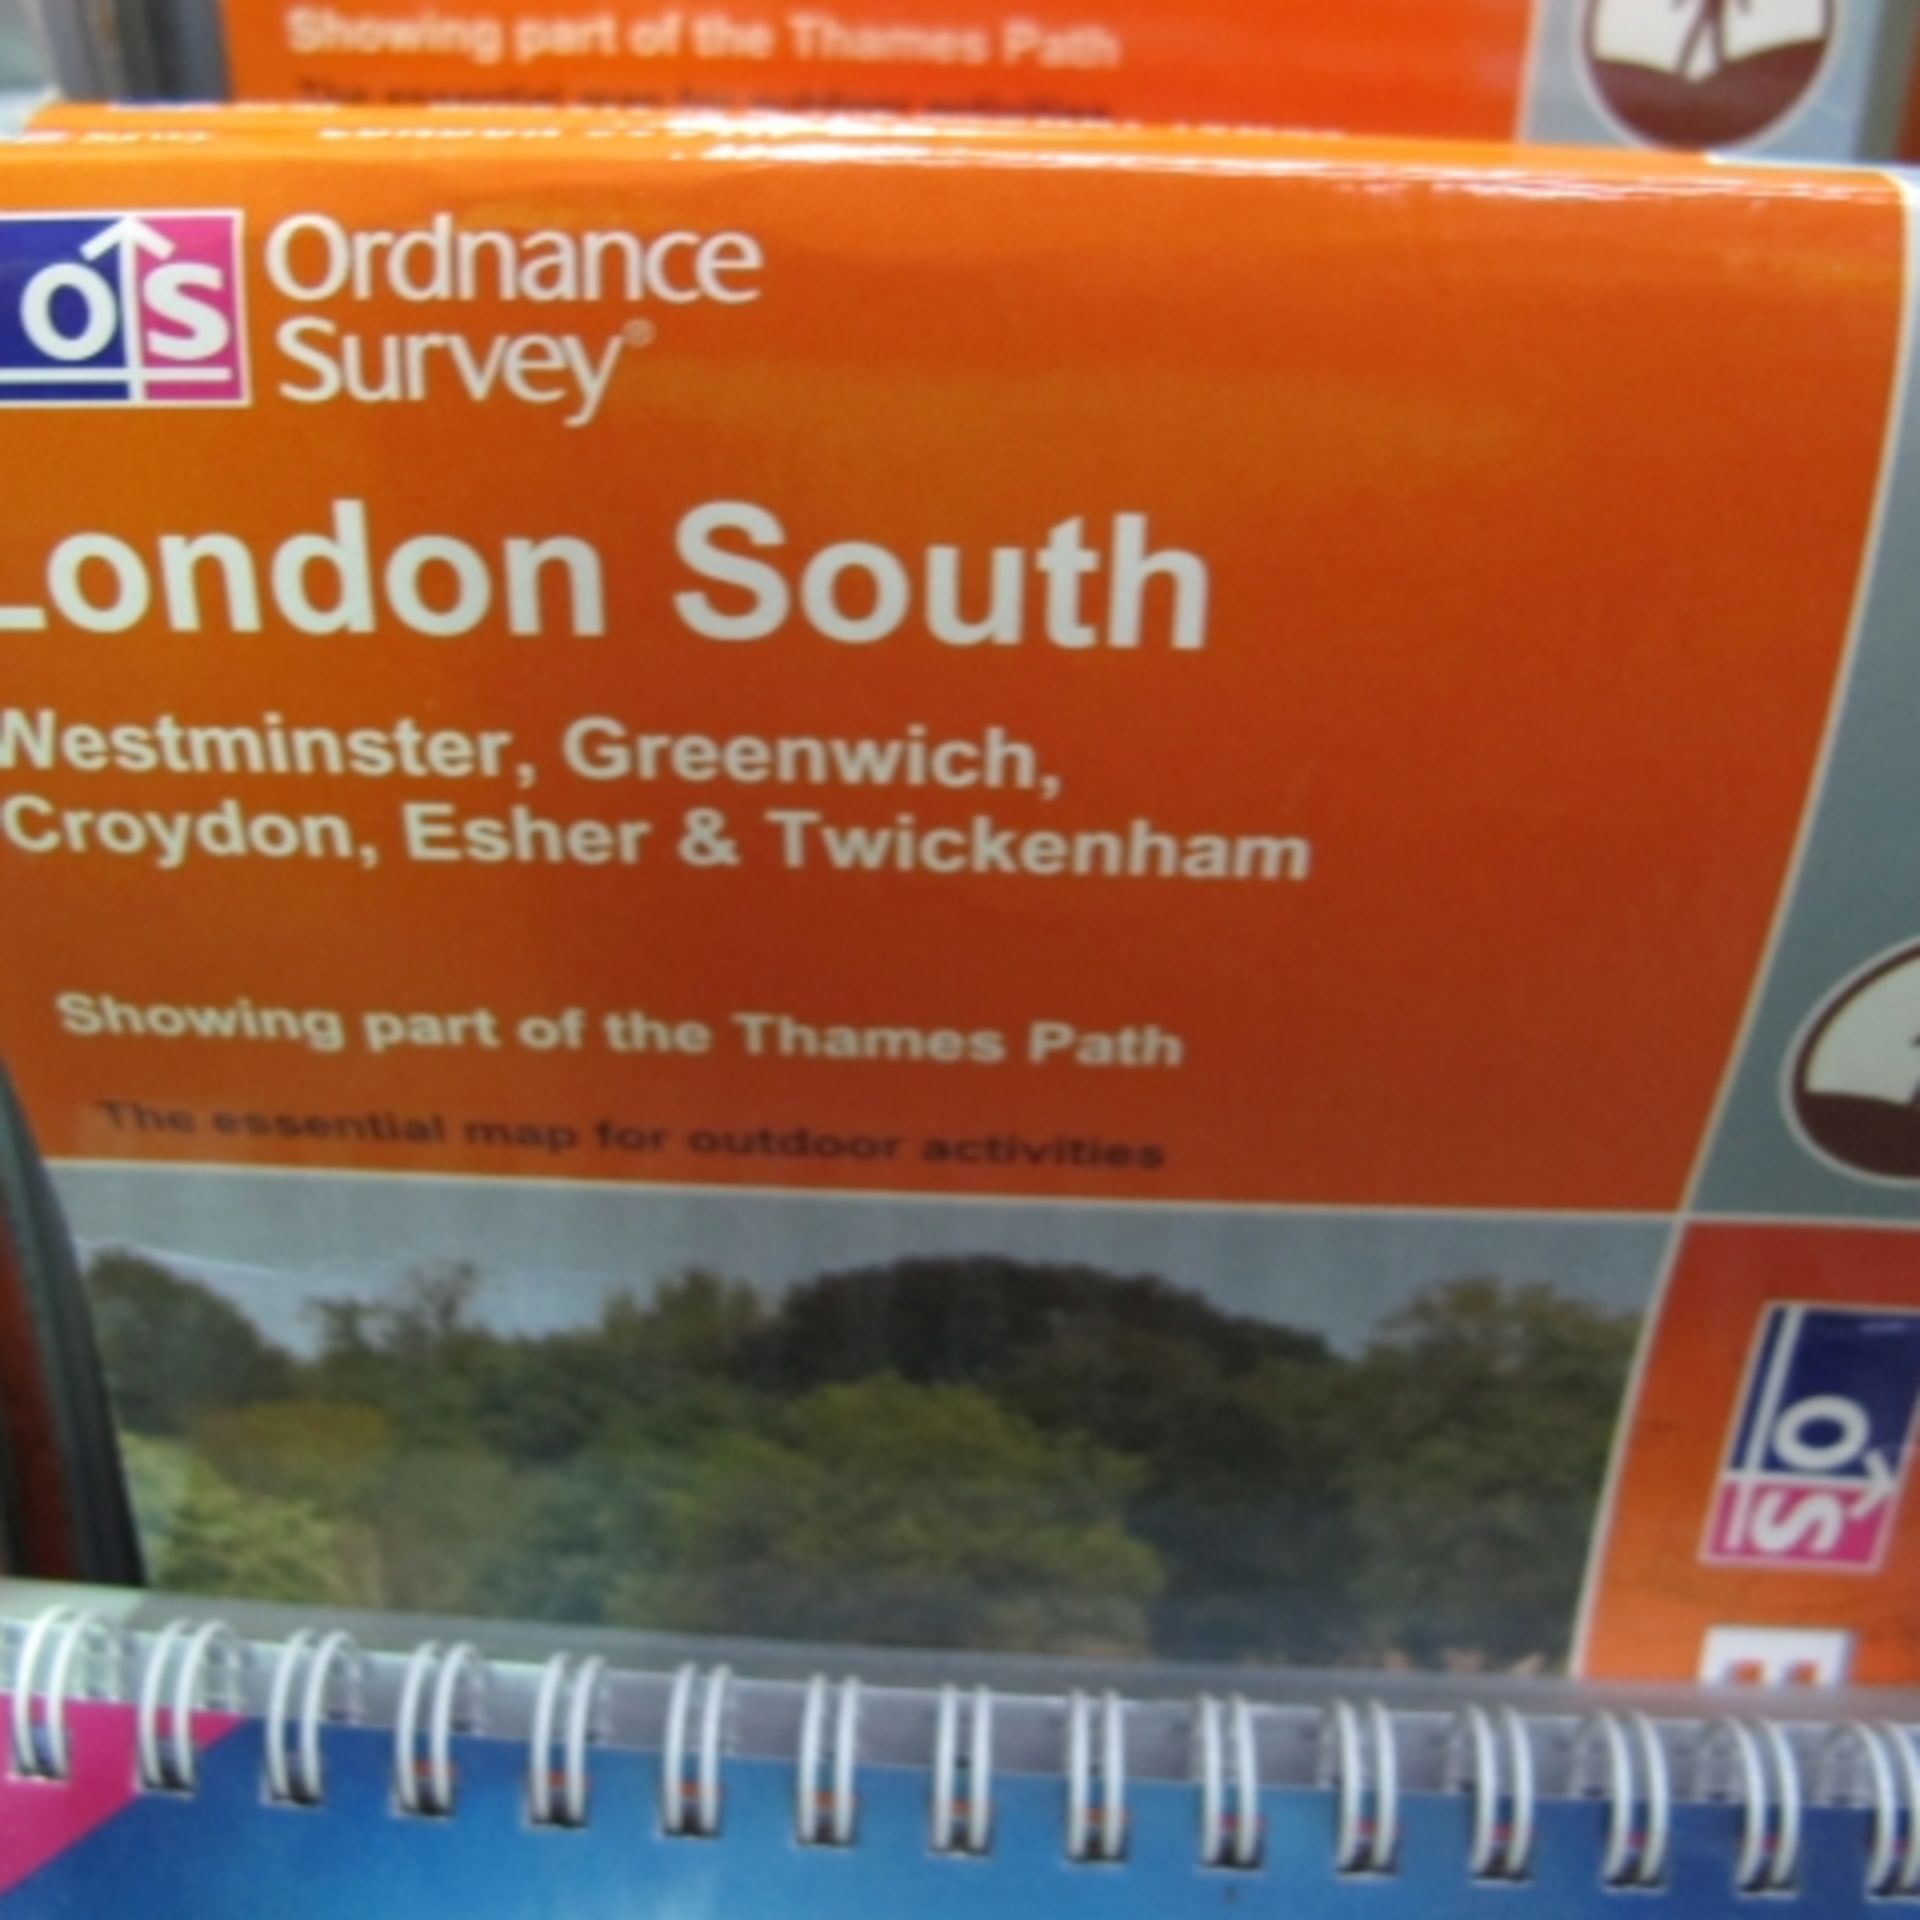 2 x Bespoke Display stands with a lower integral shelf for Ordnance Survey Maps, on castor wheels. - Image 3 of 11